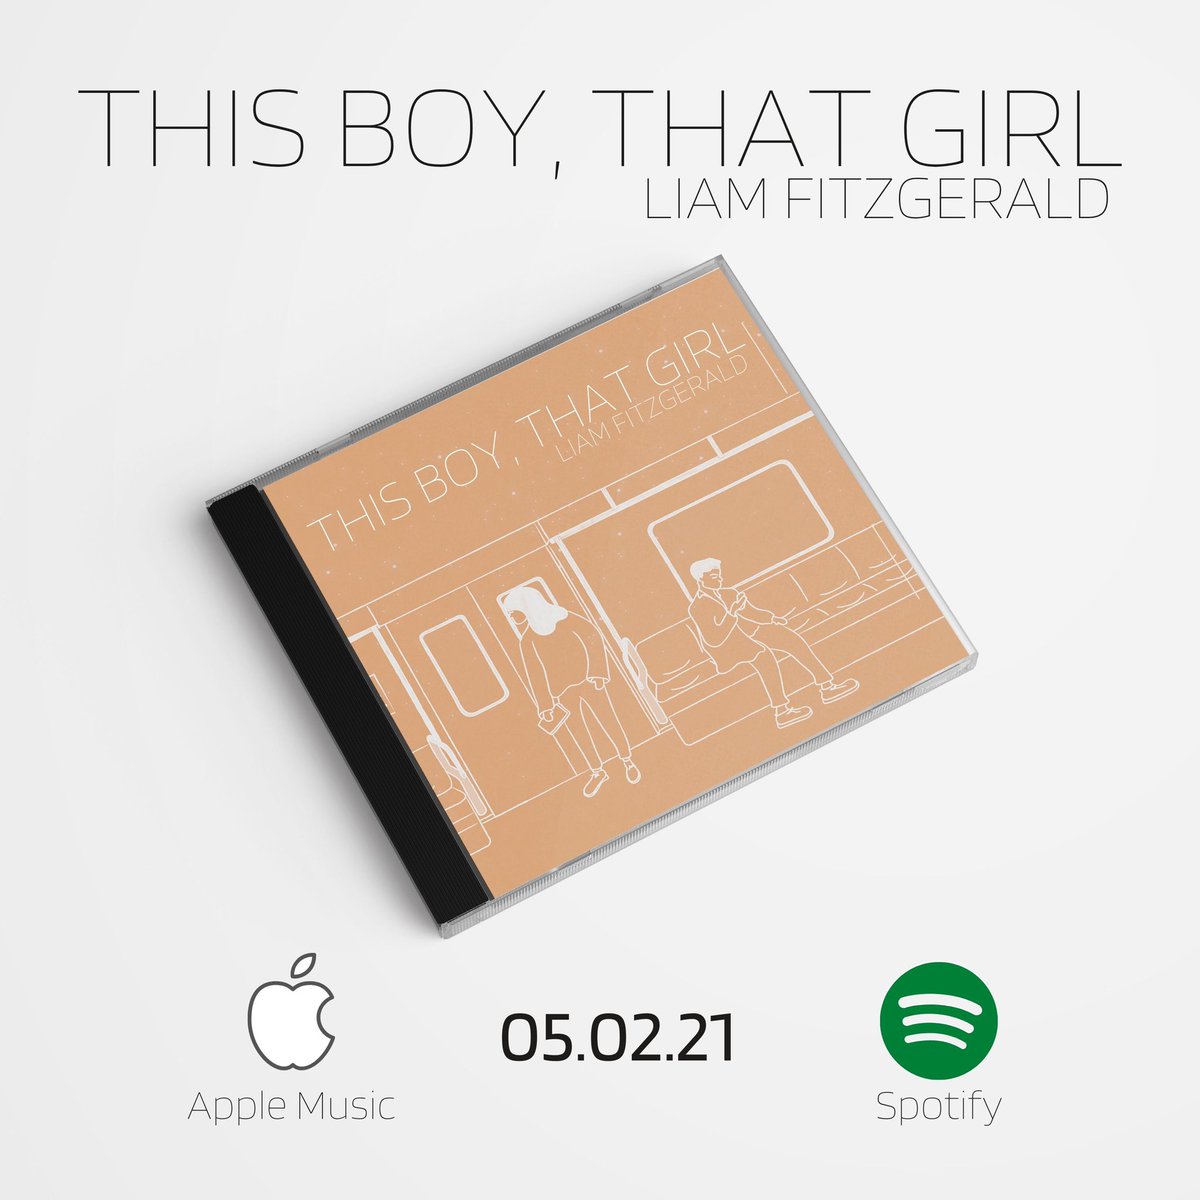 ‘This Boy, That Girl’ out 05.02.21 pre save here - ffm.to/7yojna This is what it would look like on CD which I’m not getting made.